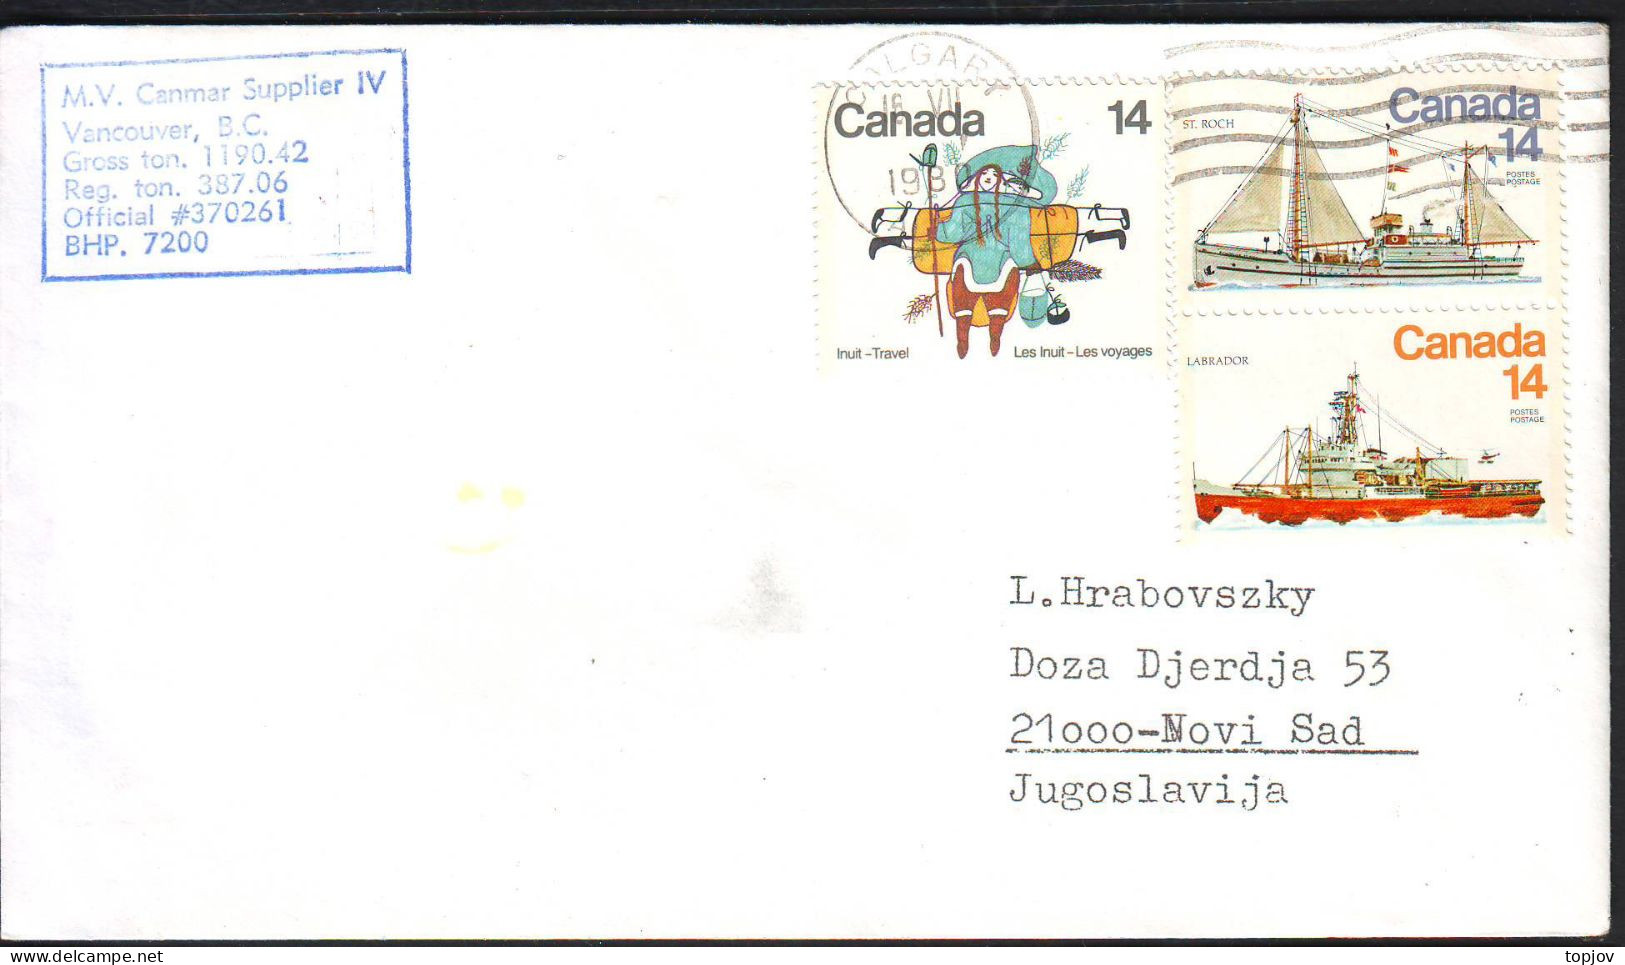 CANADA - M.V. CANMAR SUPPLIER - 1980 - Bases Antarctiques